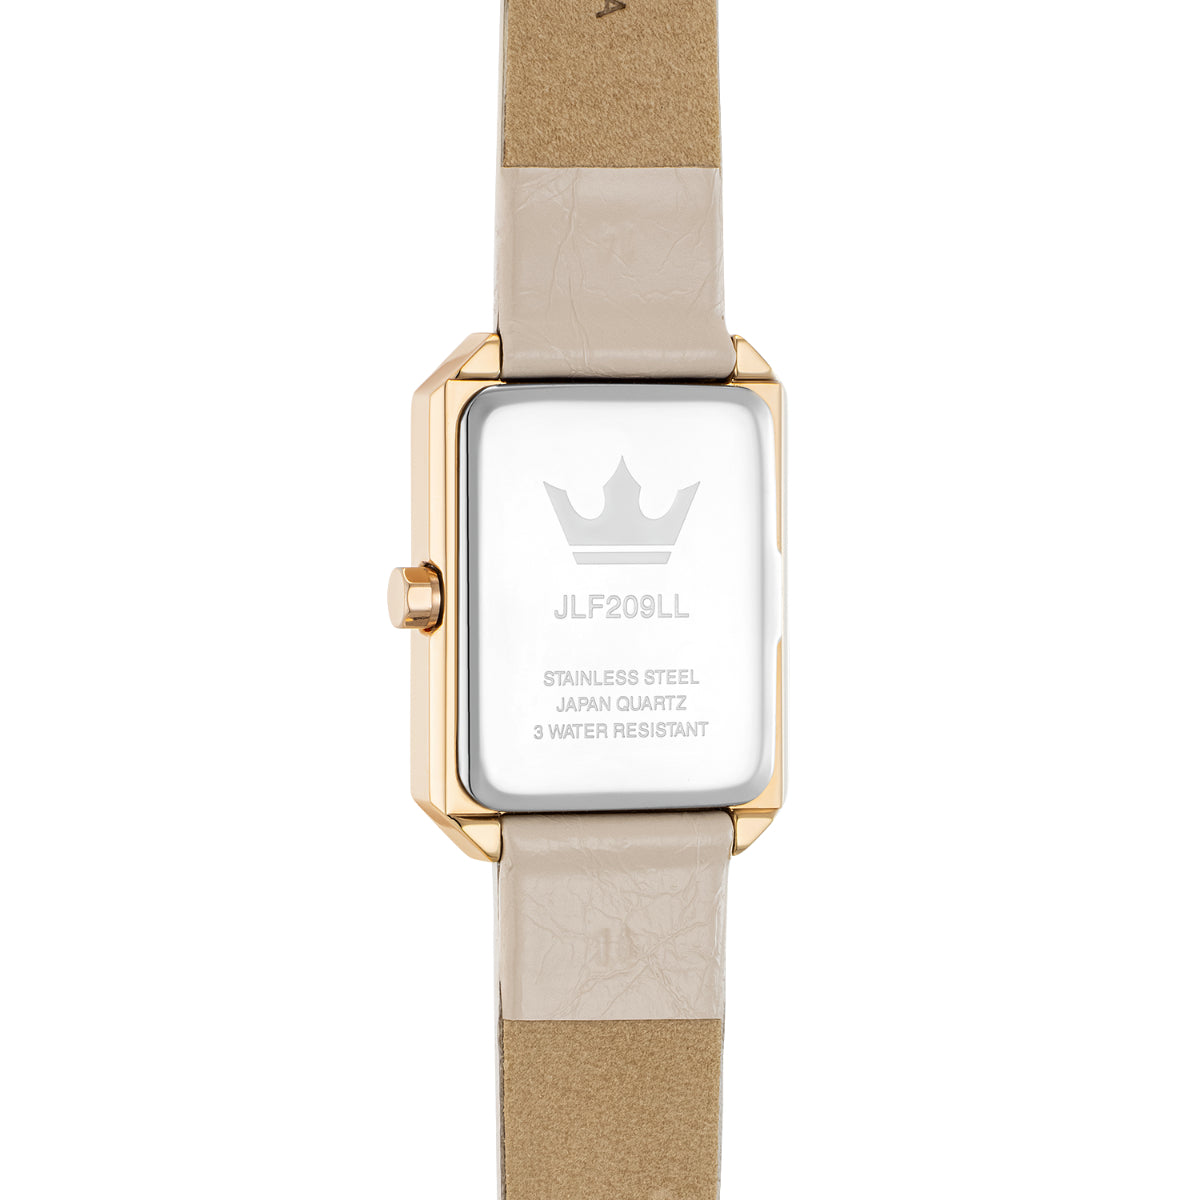 J.ESTINA Tiara Analog Watch Rose Gold Case Mother-of-pearl Dial Cream Leather Band / from Seoul, Korea